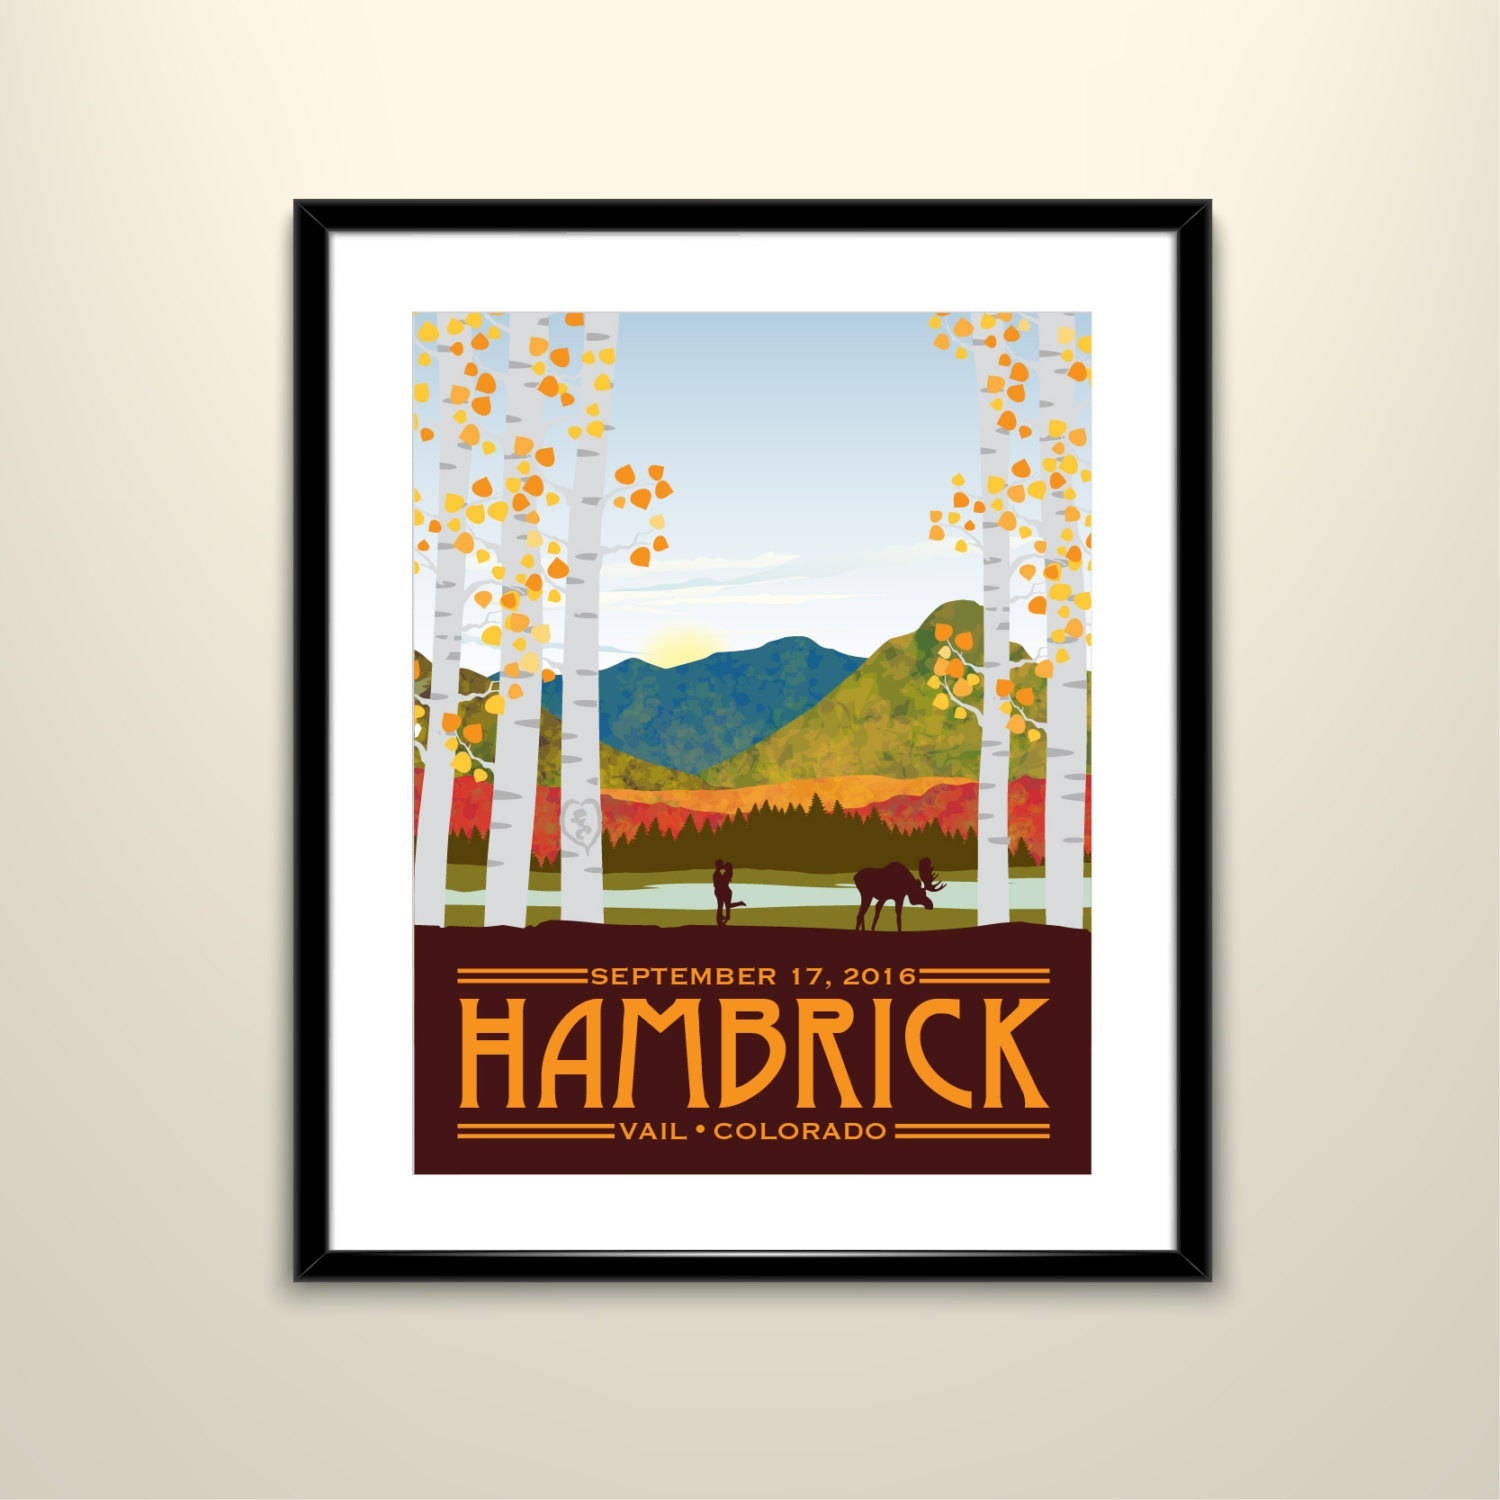 Mount of the Holy Cross, Colorado Wedding Landscape Vintage Travel Poster 11x14 /Can personalize with Names and date (frame not included)